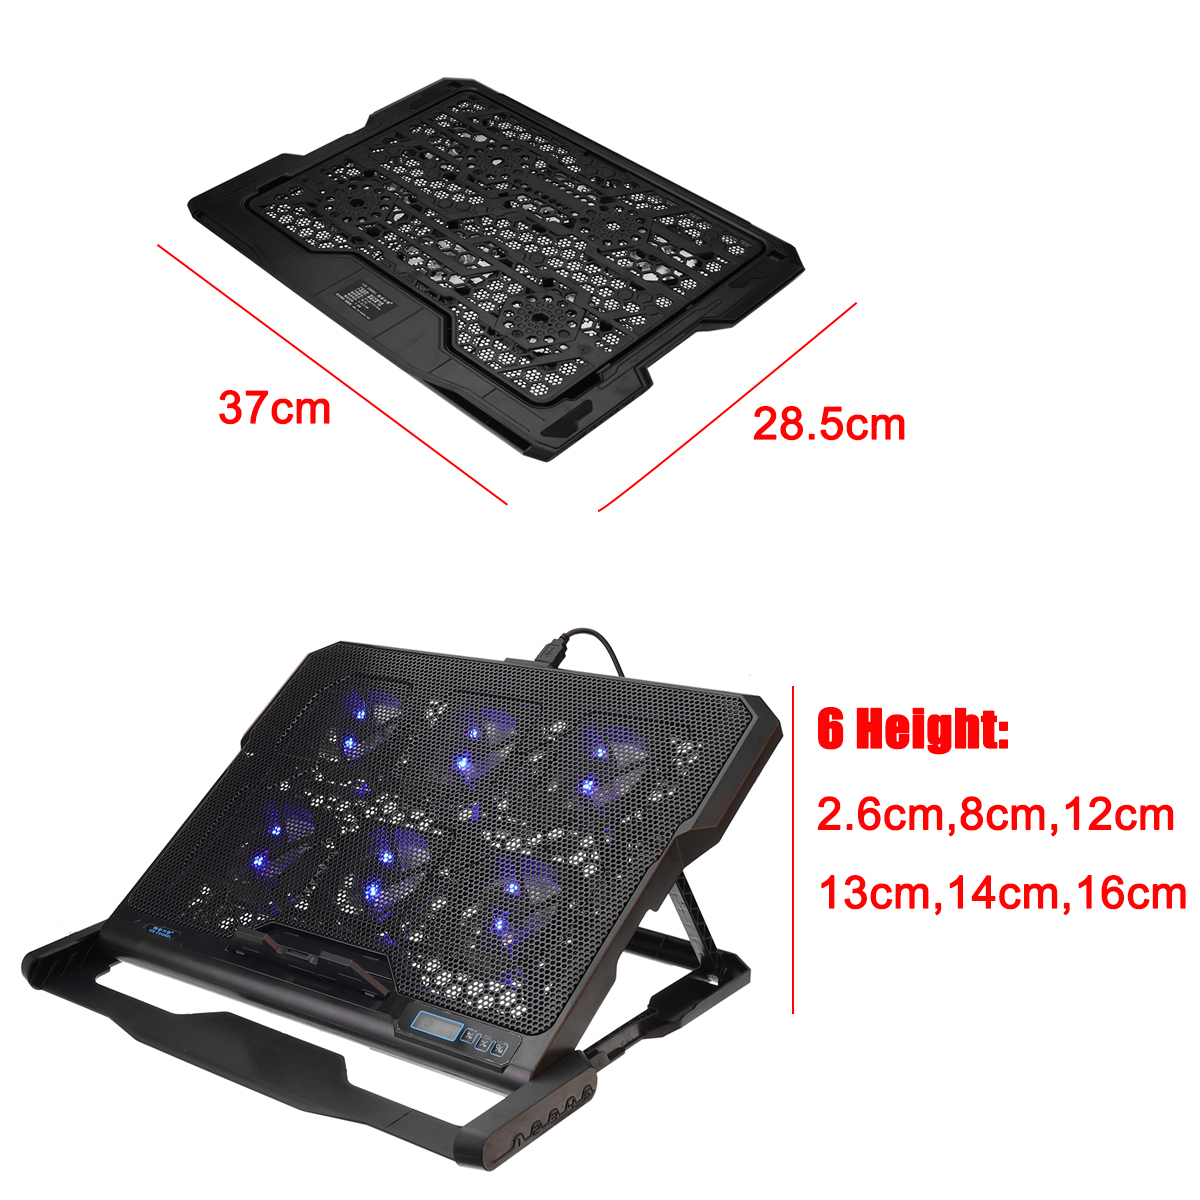 Adjustable Laptop Cooling Pad USB Cooler 6 Cooling Fans With Stand For 12-15.6 inch Laptop Use 20